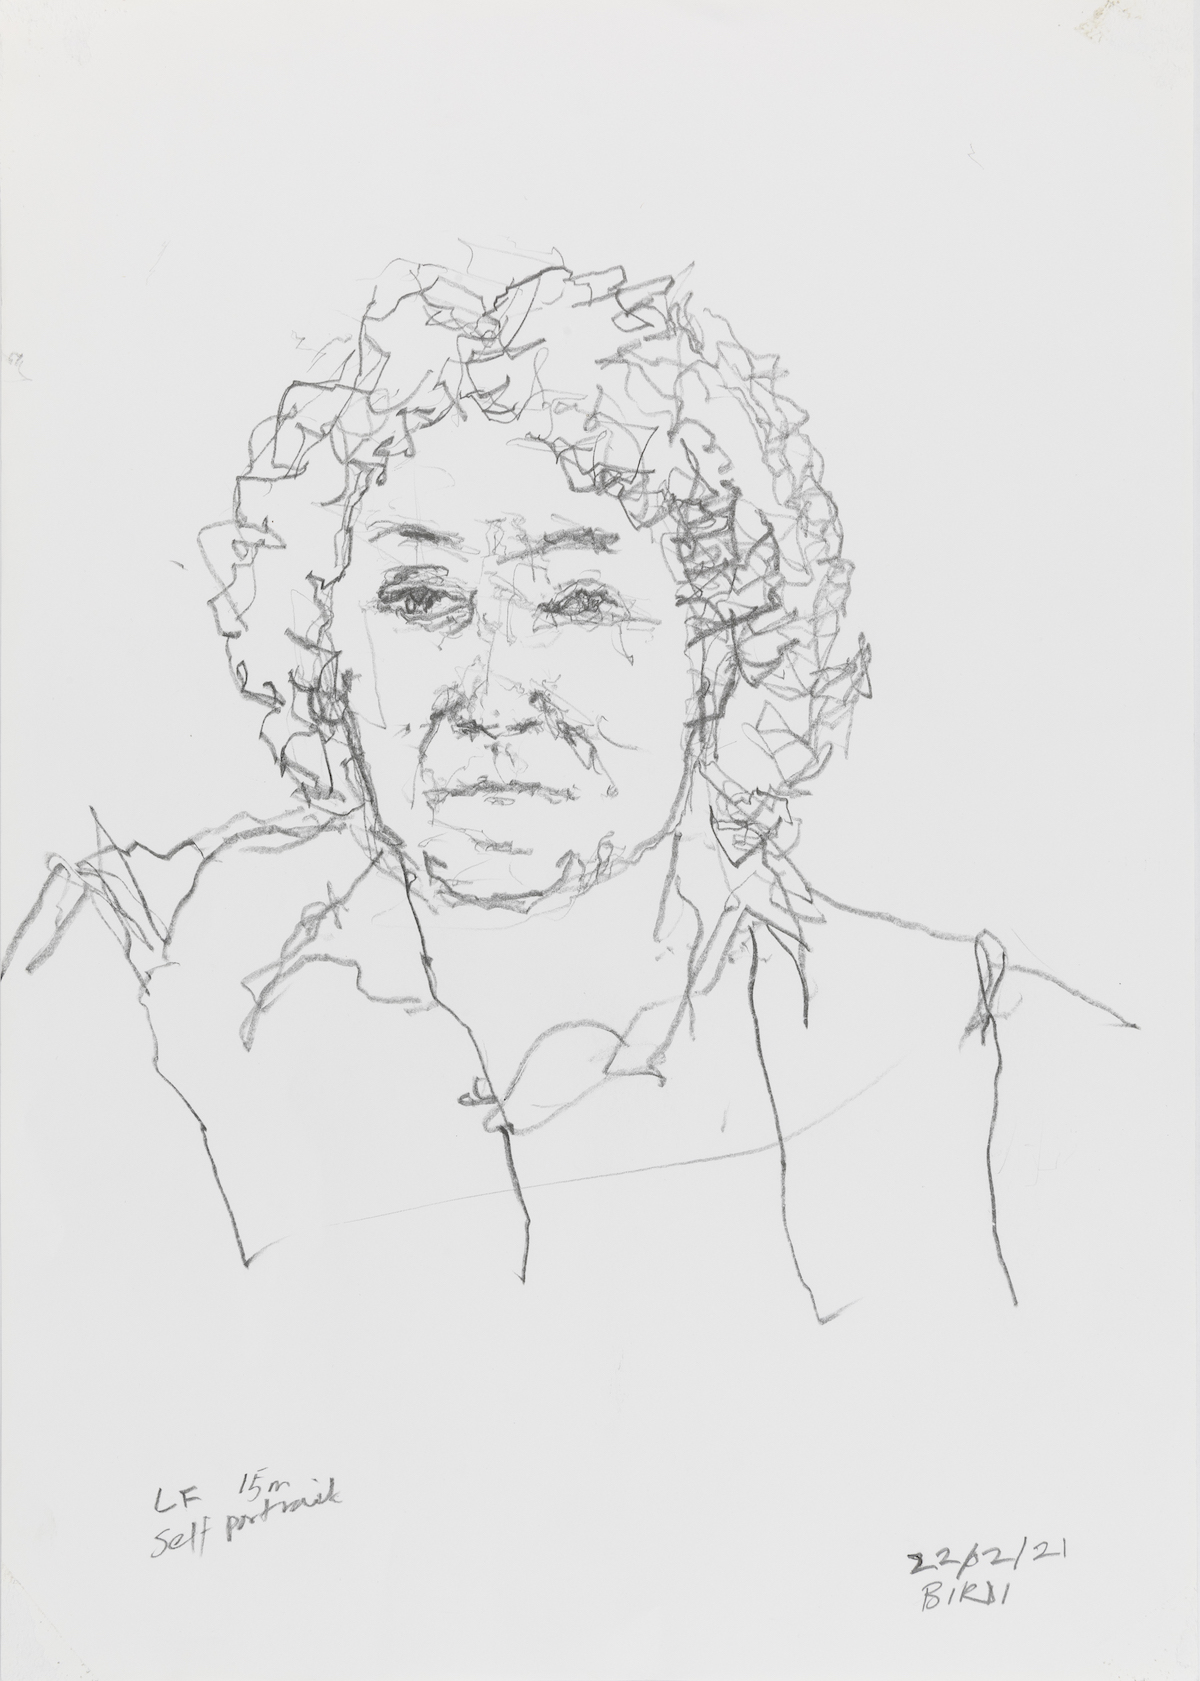 A self portrait by Saranjit BIrdi featuring his head, curly hair and shoulders. He appears to be wearing an open-collar shirt. At the bottom in pencil are the words 'LF [Left foot] 15m [15 minutes] Self Portrait 22/02/2021 Birdi'